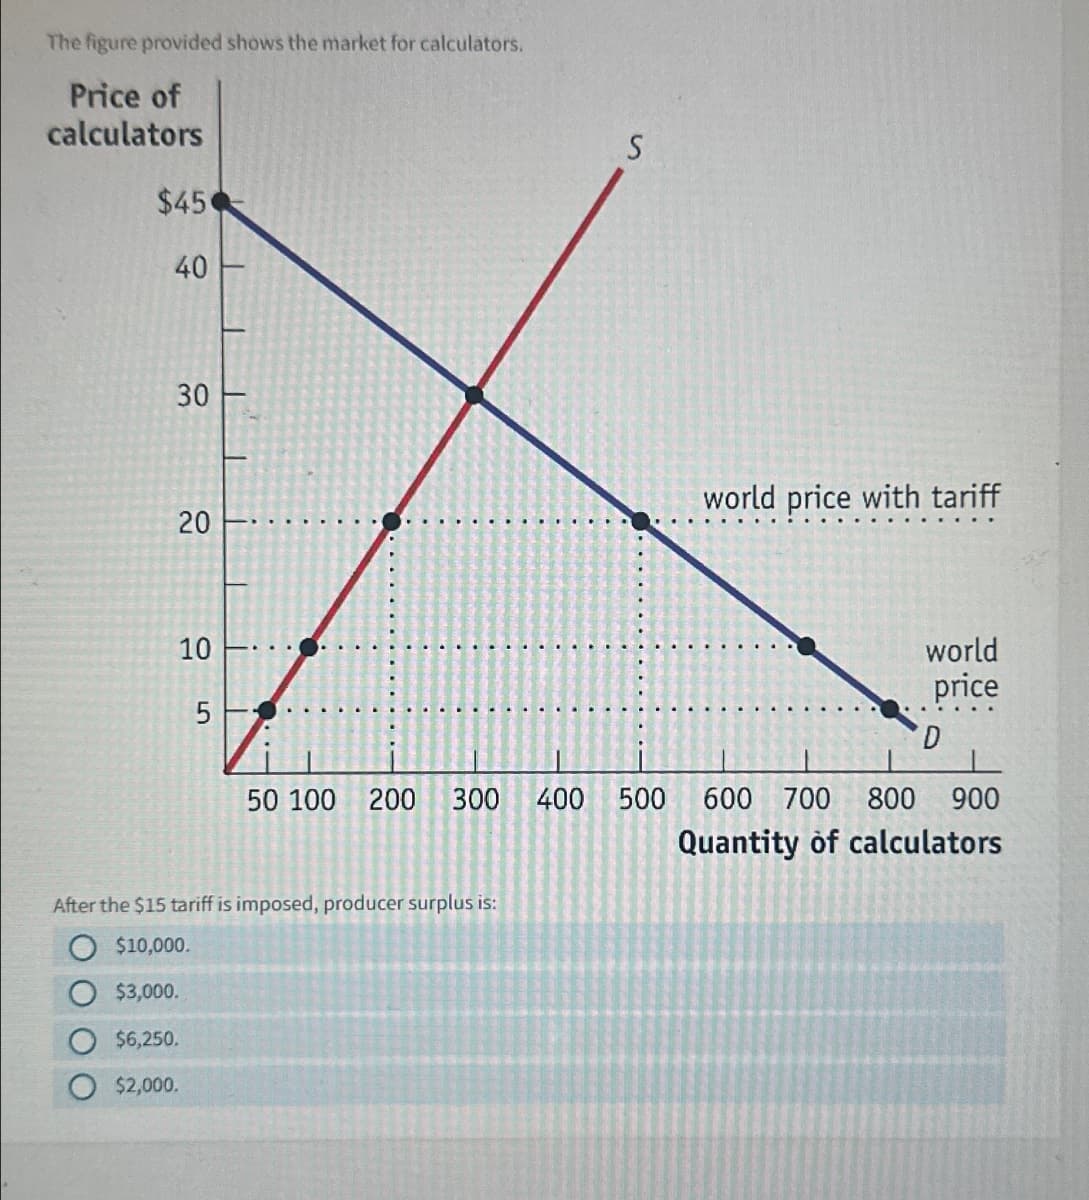 The figure provided shows the market for calculators.
Price of
calculators
$45
40
30
30
S
world price with tariff
20
10
5
world
price
D
50 100 200 300 400 500 600 700 800 900
After the $15 tariff is imposed, producer surplus is:
$10,000.
$3,000.
$6,250.
$2,000.
Quantity of calculators